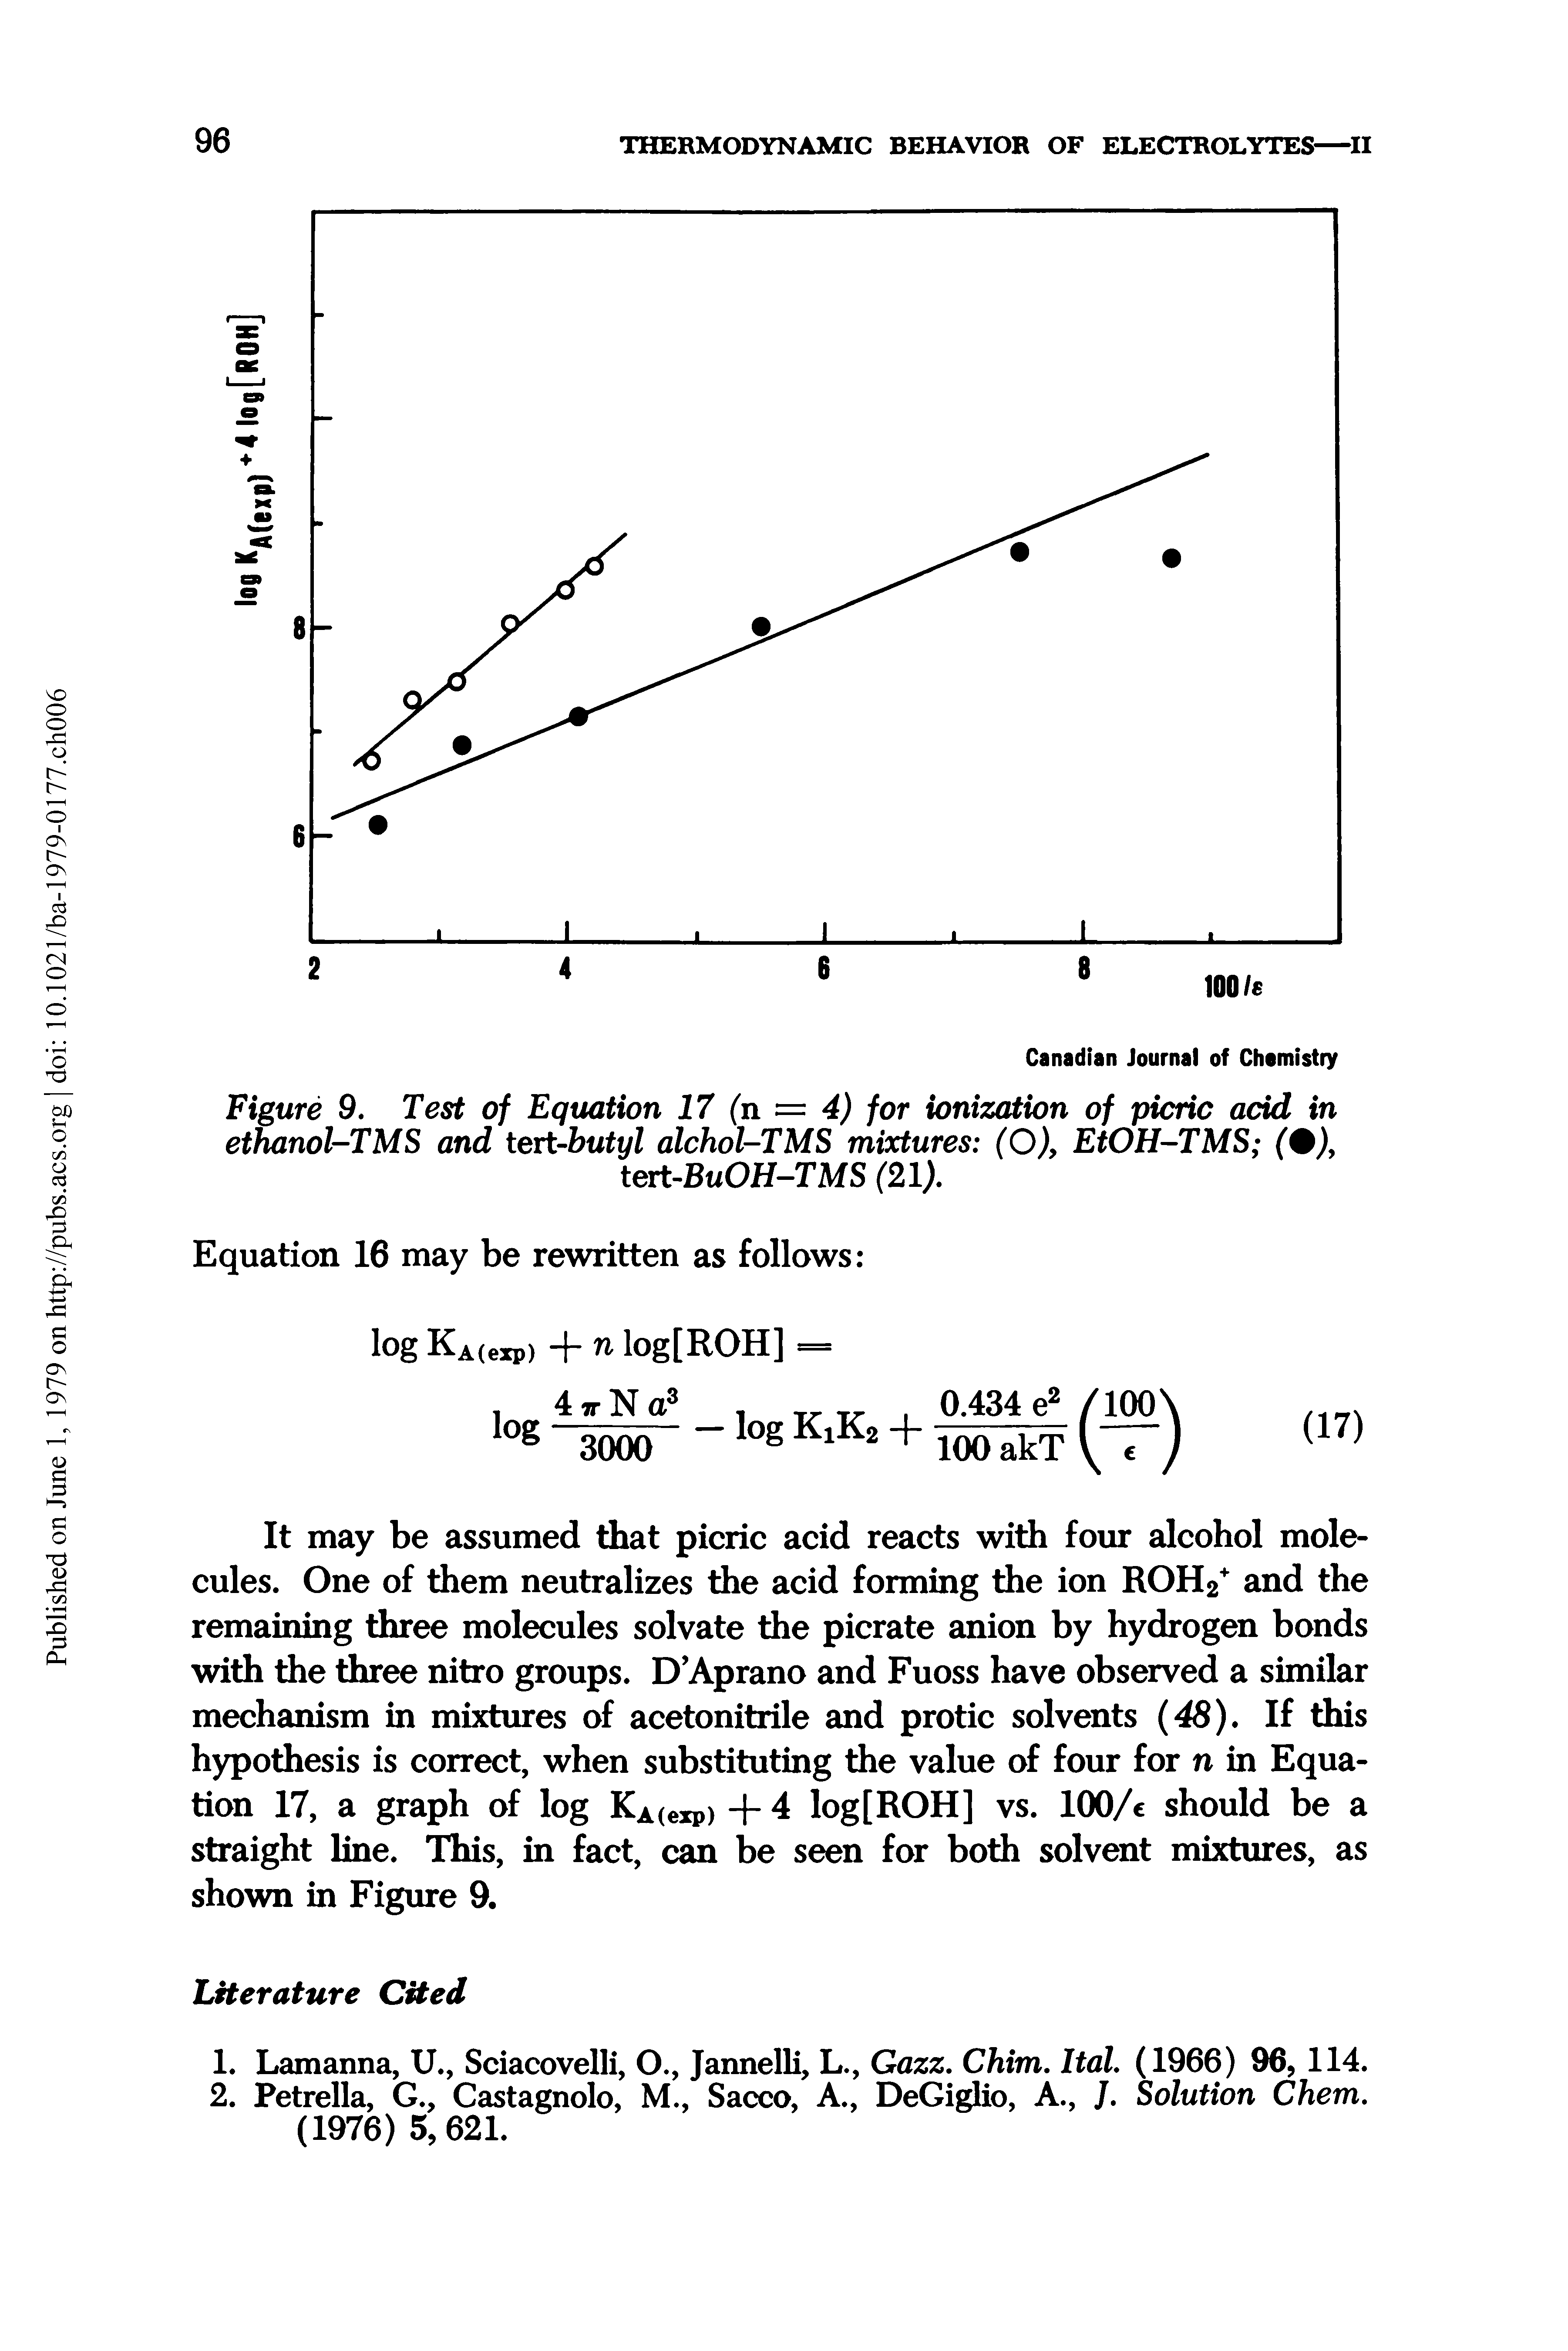 Figure 9. Test of Equation 17 (n = 4) for ionization of picric acid in ethanol-TMS and text-butyl alchol-TMS mixtures (O), EtOH-TMS ( ),...